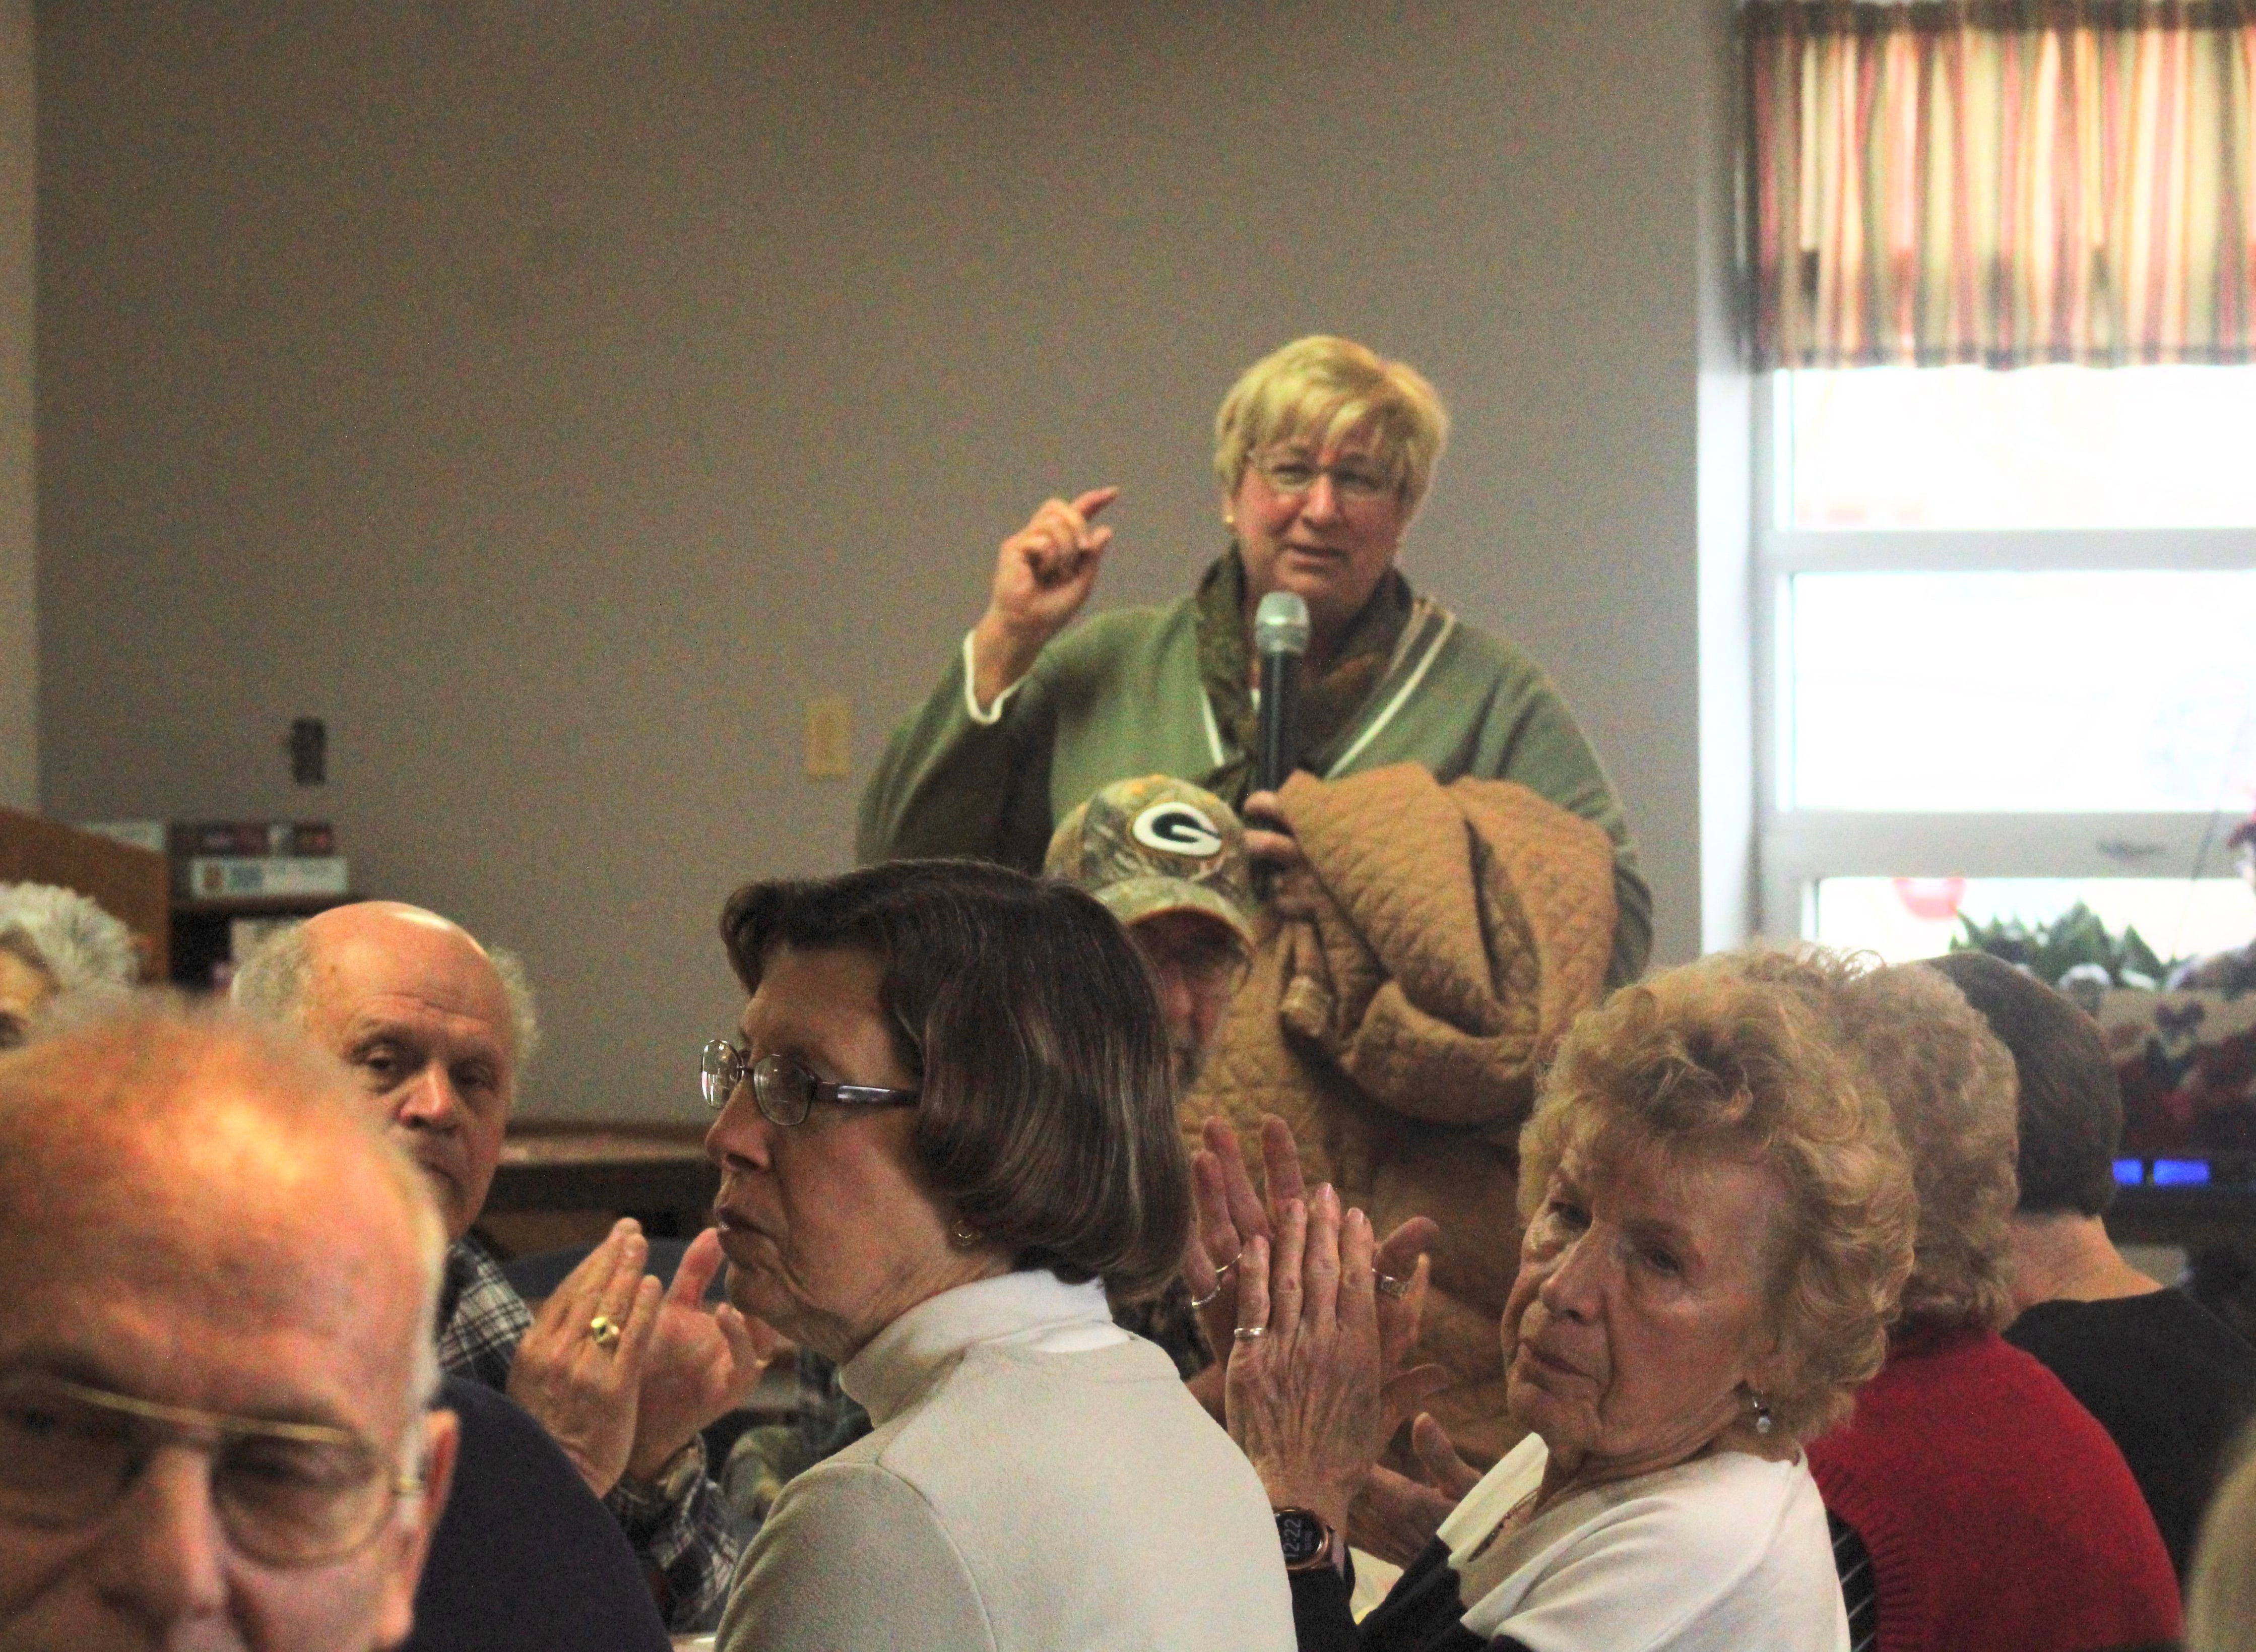 Paula Basta, director of the state Department on Aging, commends the volunteers who served the Friday, March 10, 2023 meal at the Whiteside County Senior Center, eliciting applause from the diners in attendance.